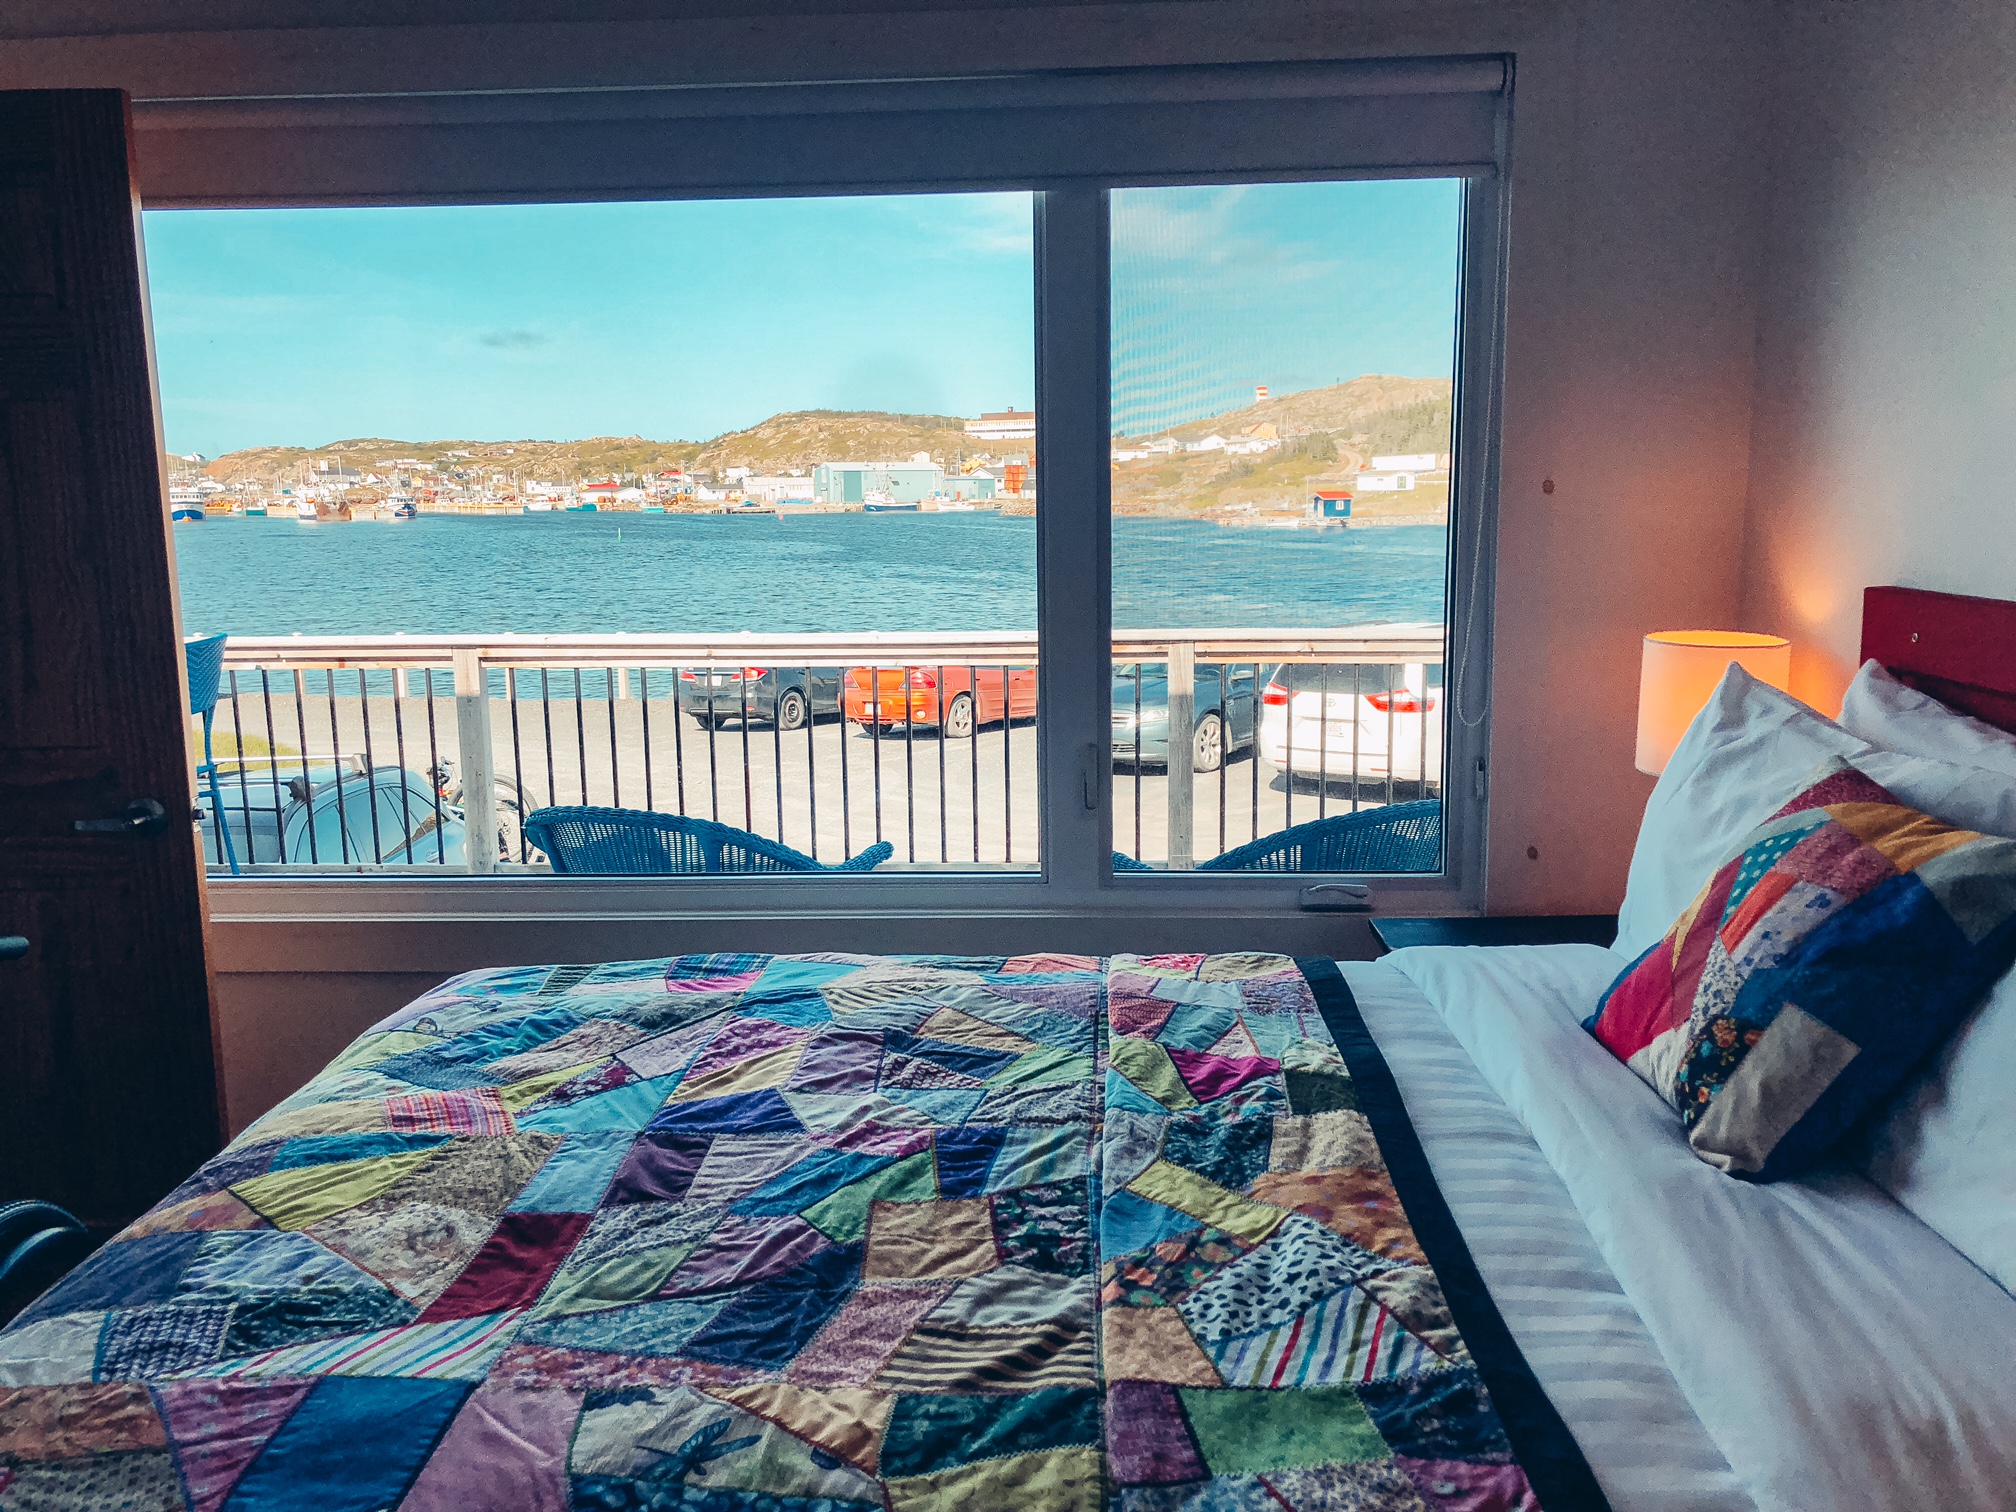 A photo of the view of the harbour from the large window next to the queen sized bed in the main bedroom.